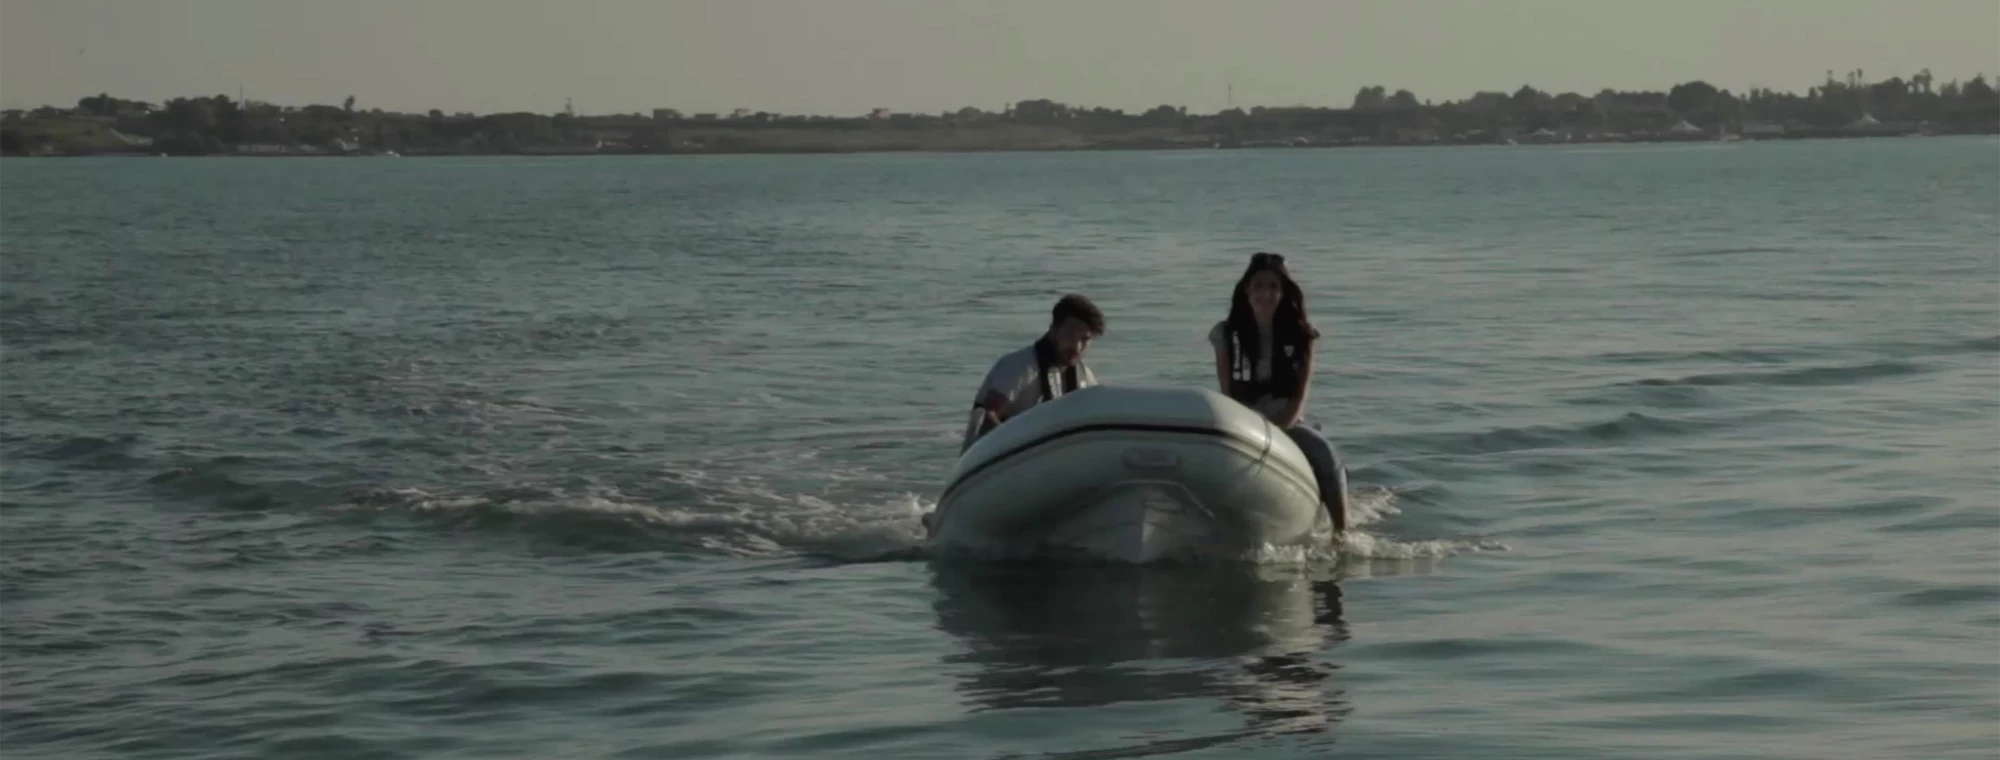 inflatable boat with two people heading to shore